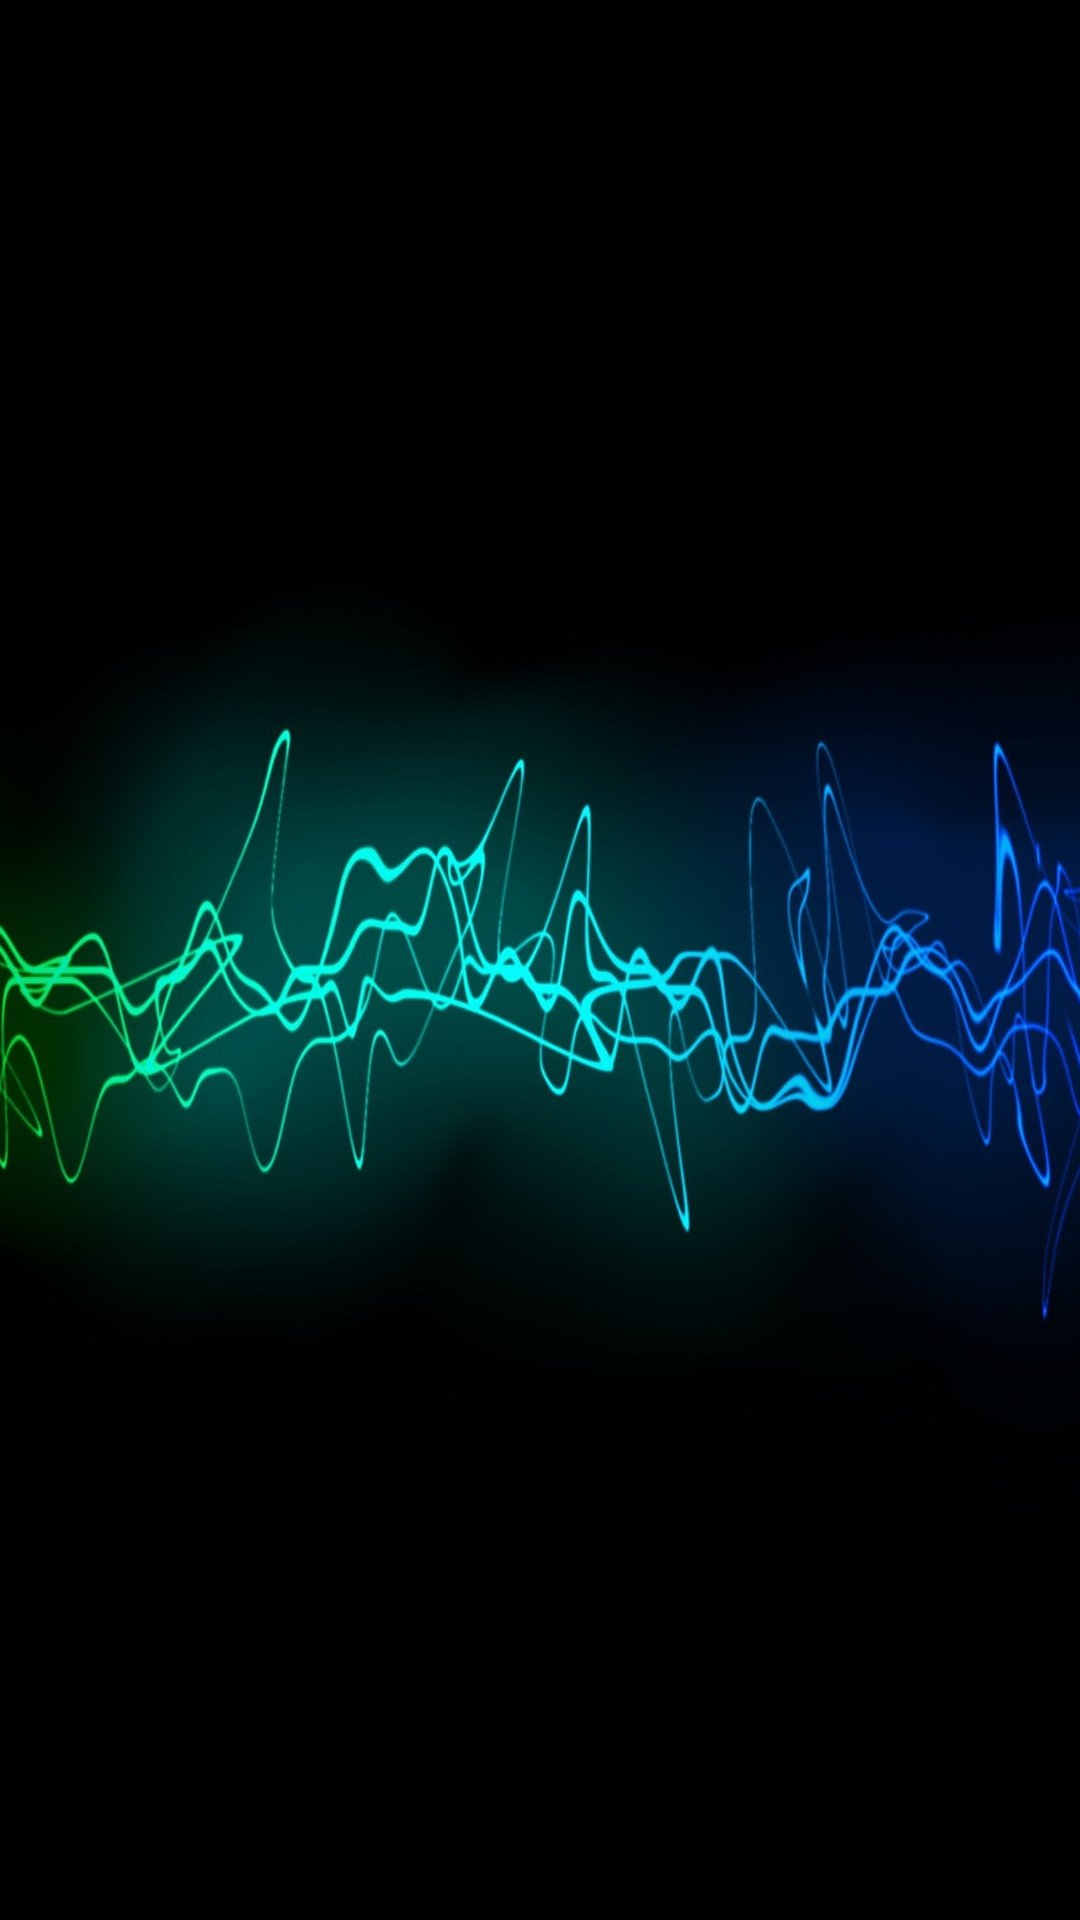 Cool Sound Waves Wallpaper Cool Sound Waves Iphone 6